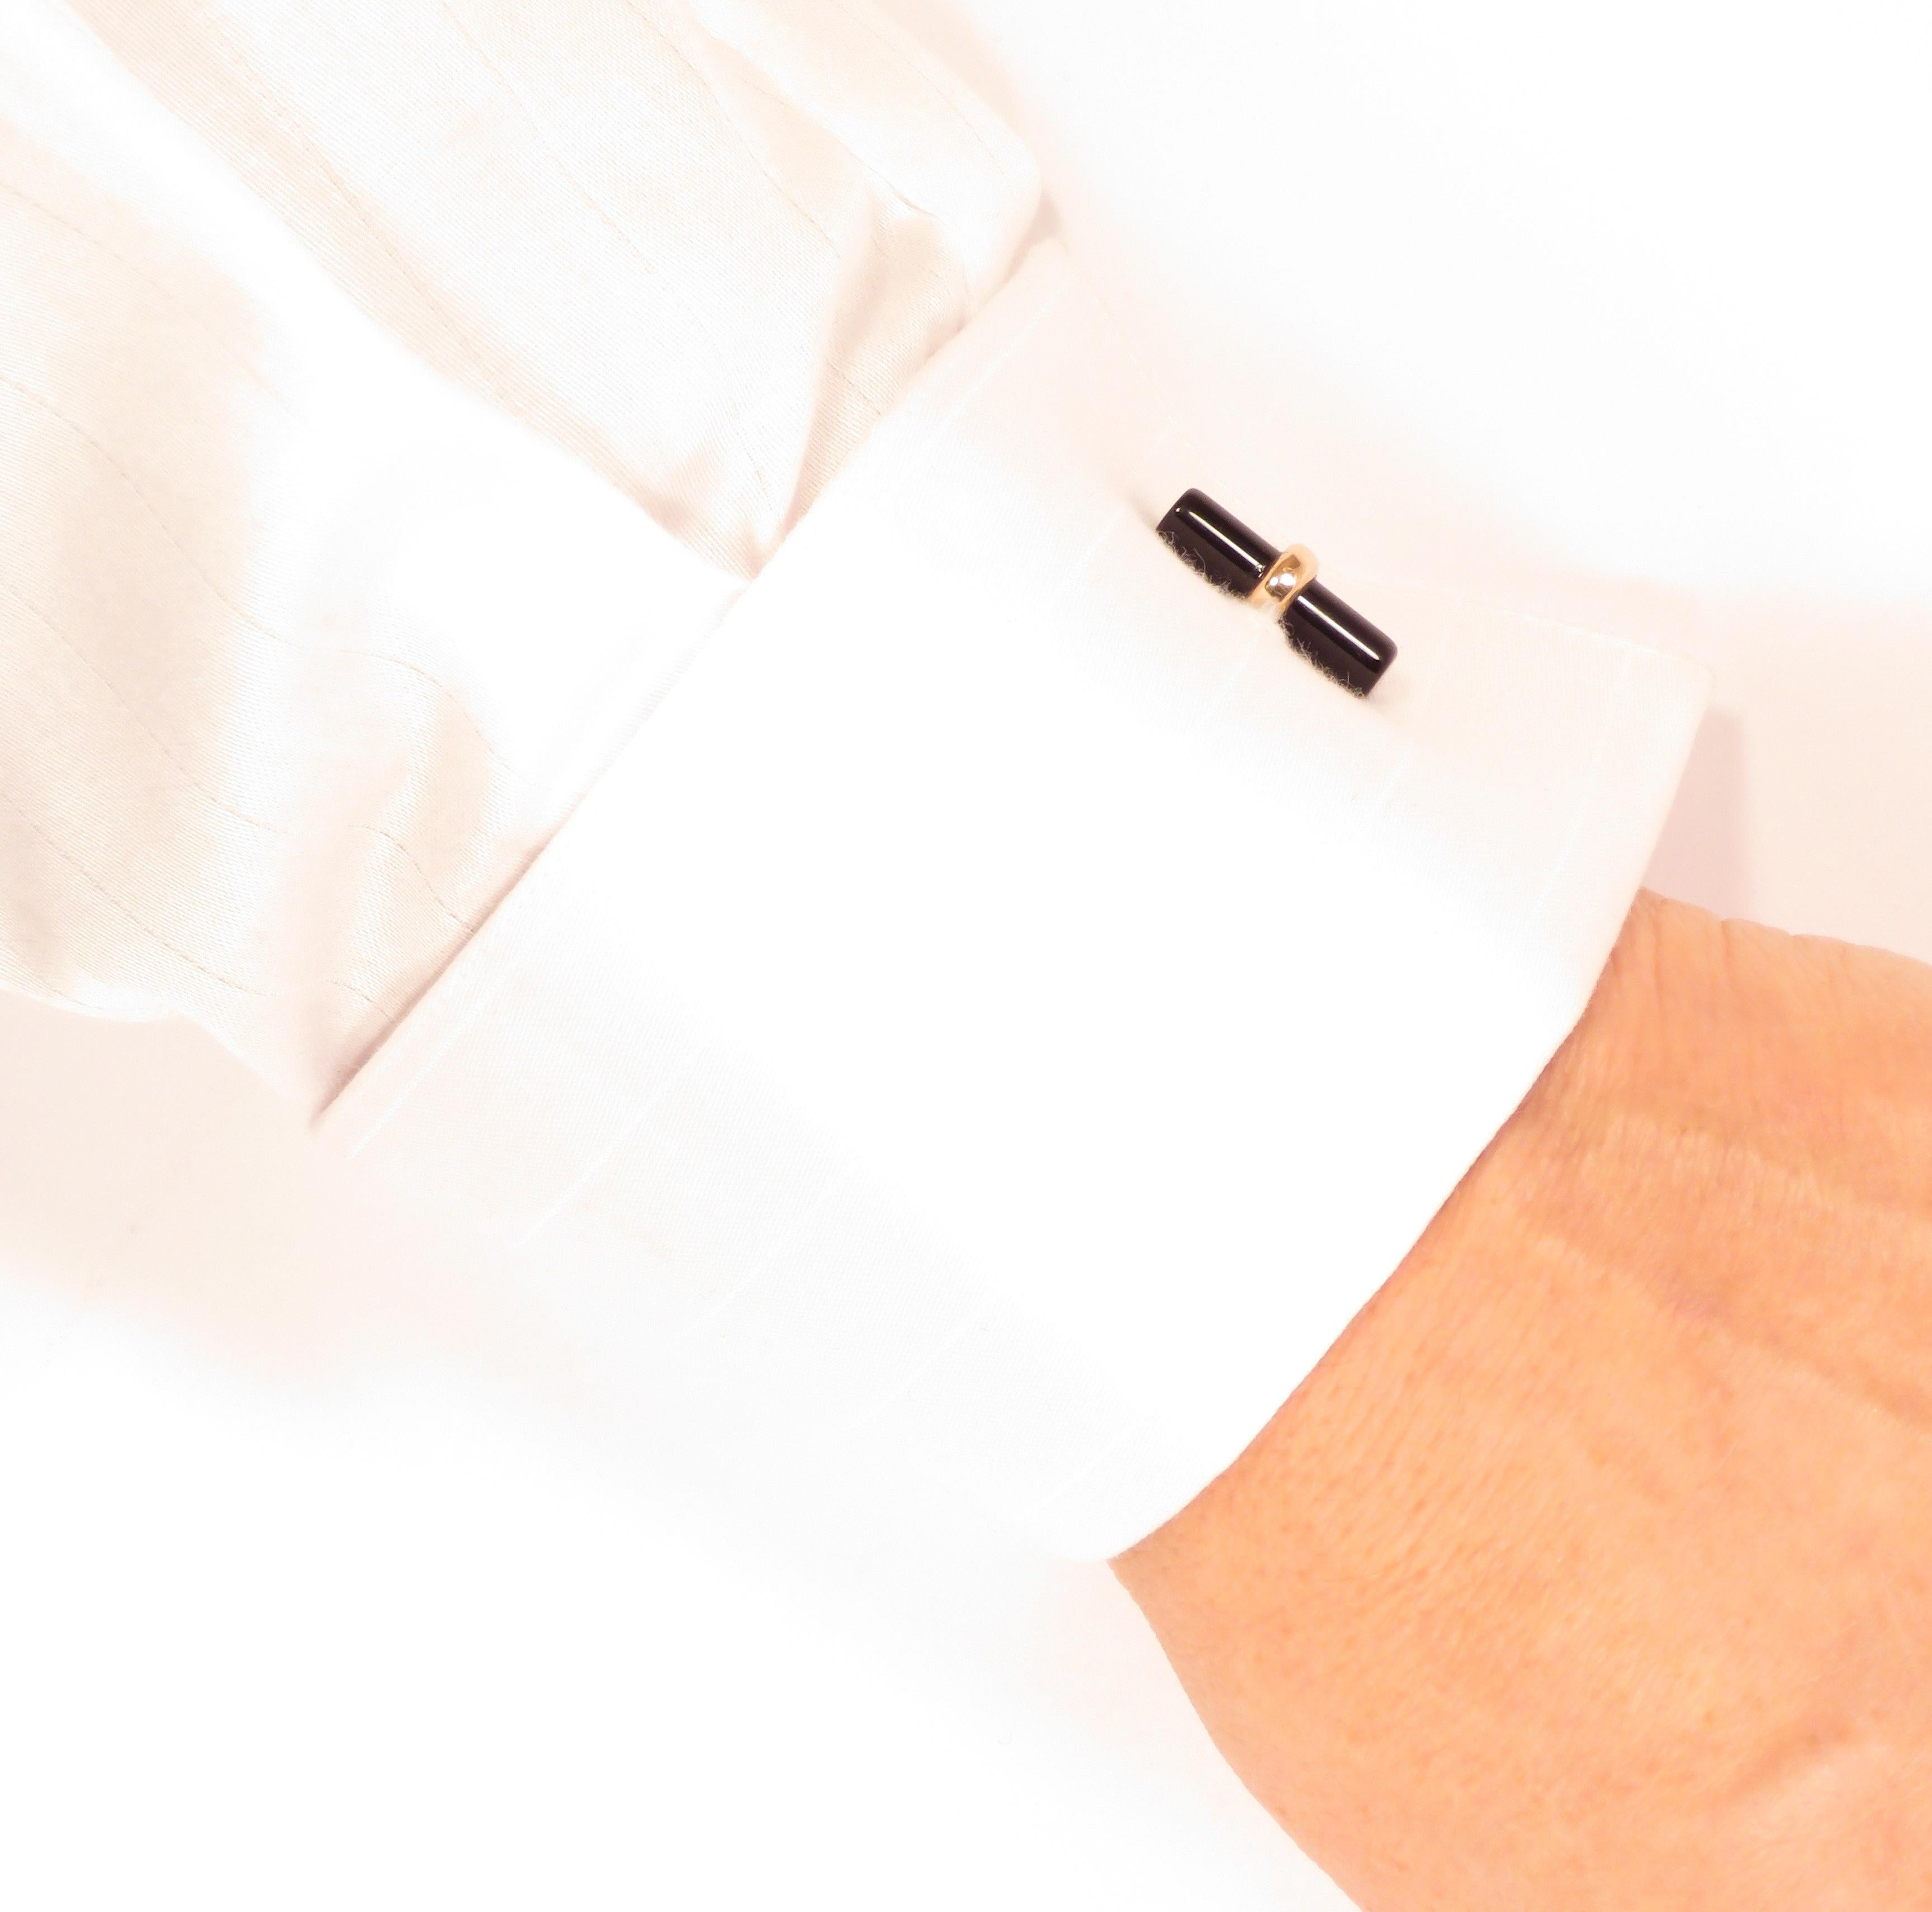 Contemporary cufflinks handcrafted in 9 karat rose gold featuring four natural black onyx bars. Gemstones size is: length 20 mm - diameter 5 mm / length 0.787 inches - diameter 0.196 inches. They are marked with the Italian Gold Mark 375 and Botta